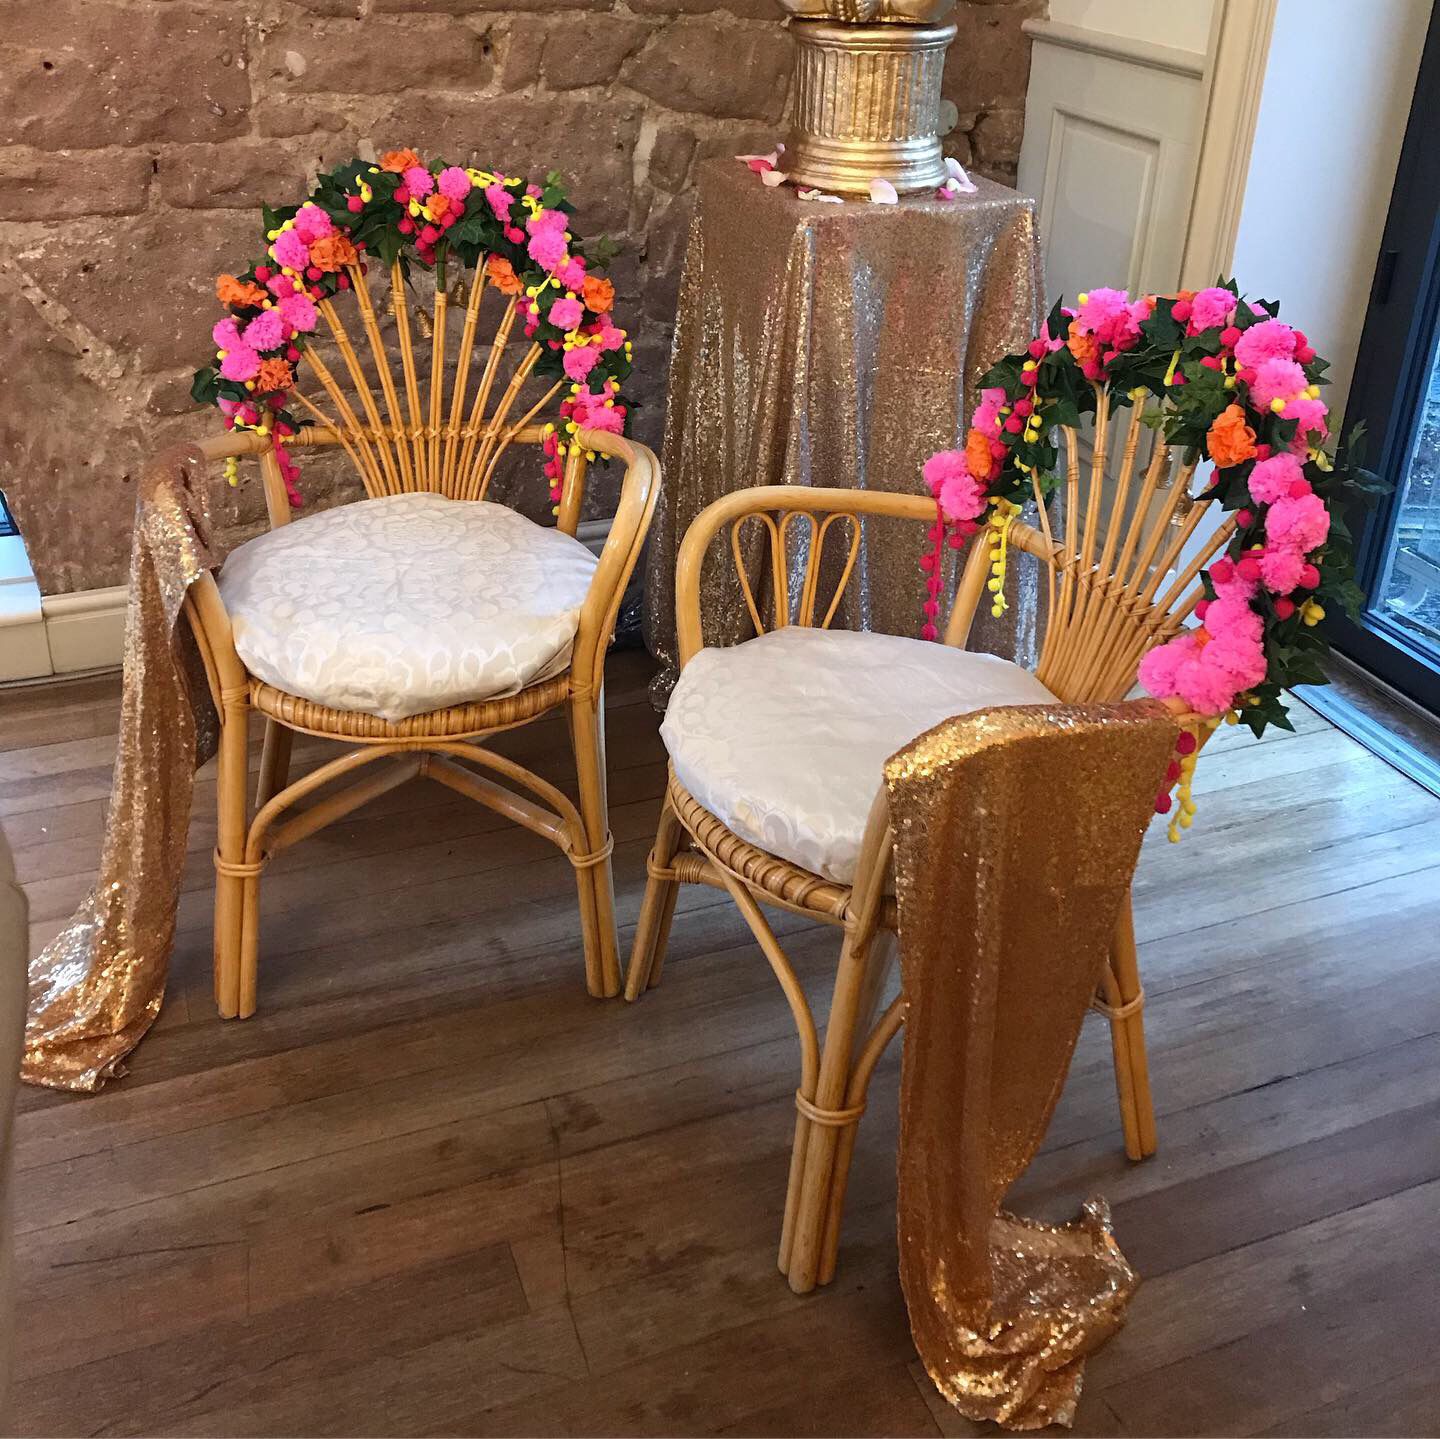 Two woven wooden chairs, with pretty flowers garnishing the edges.